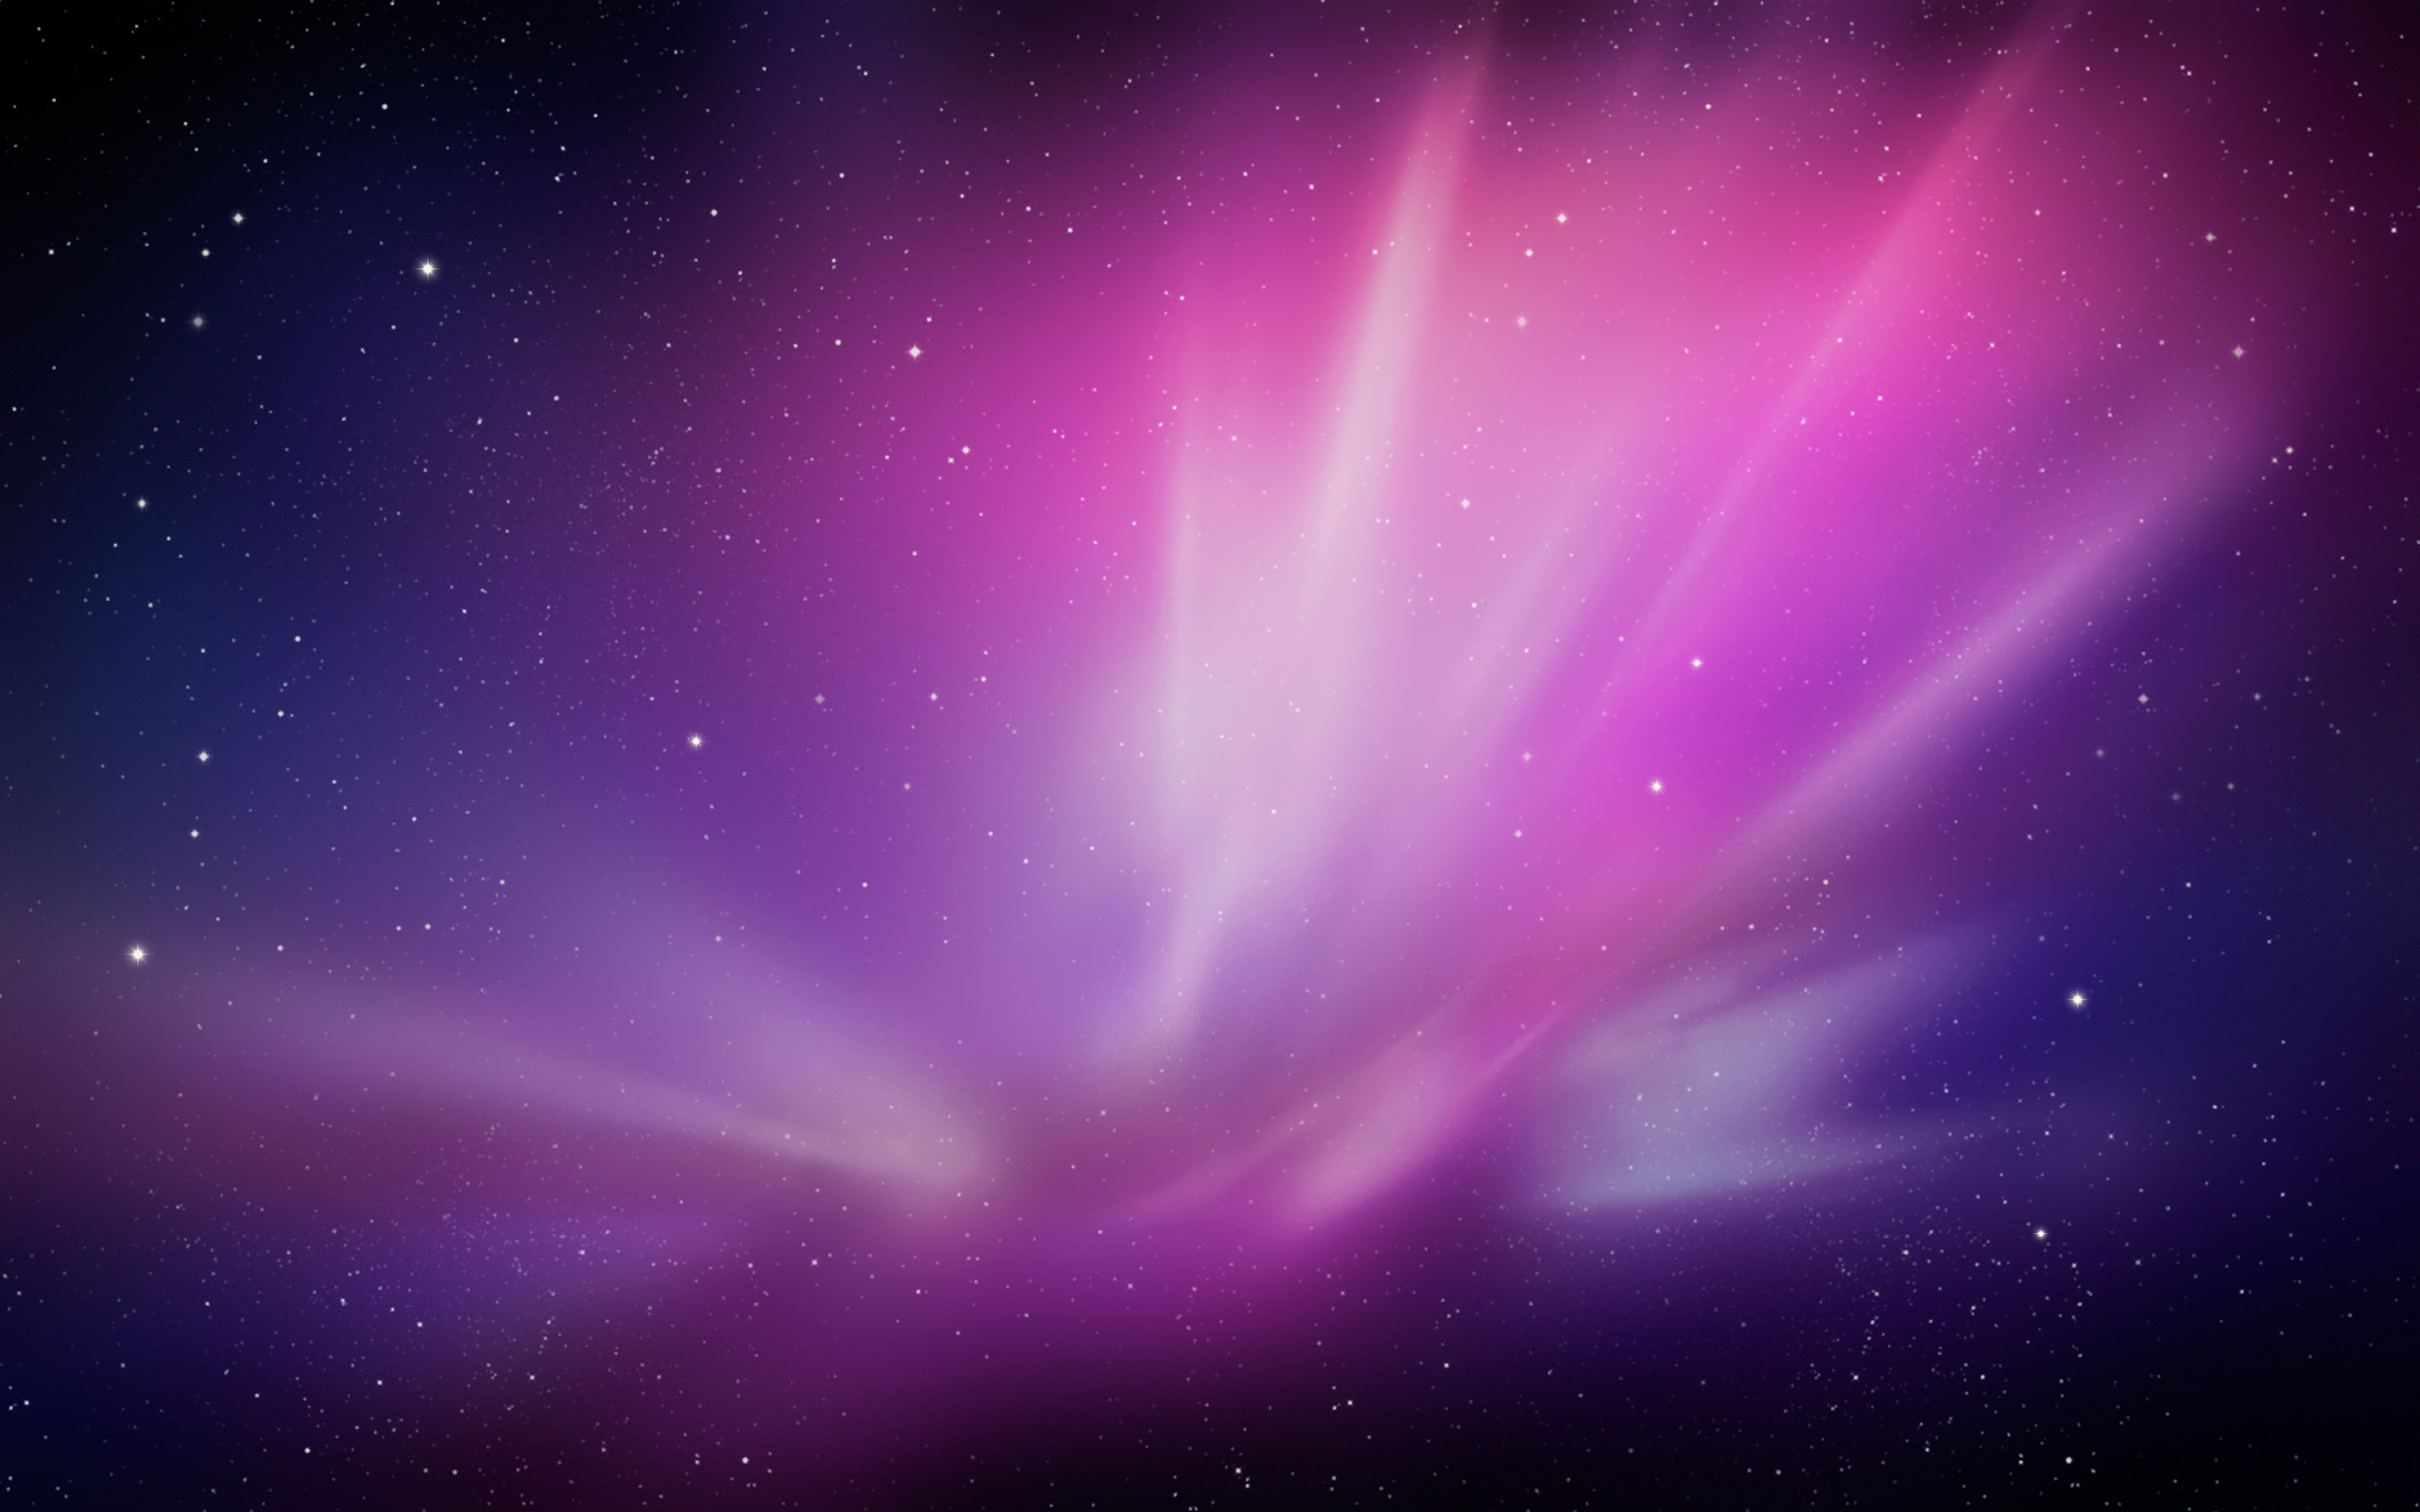 2560x1600 Free-HD-Galaxy-Backgrounds-Tumblr-Images-Download